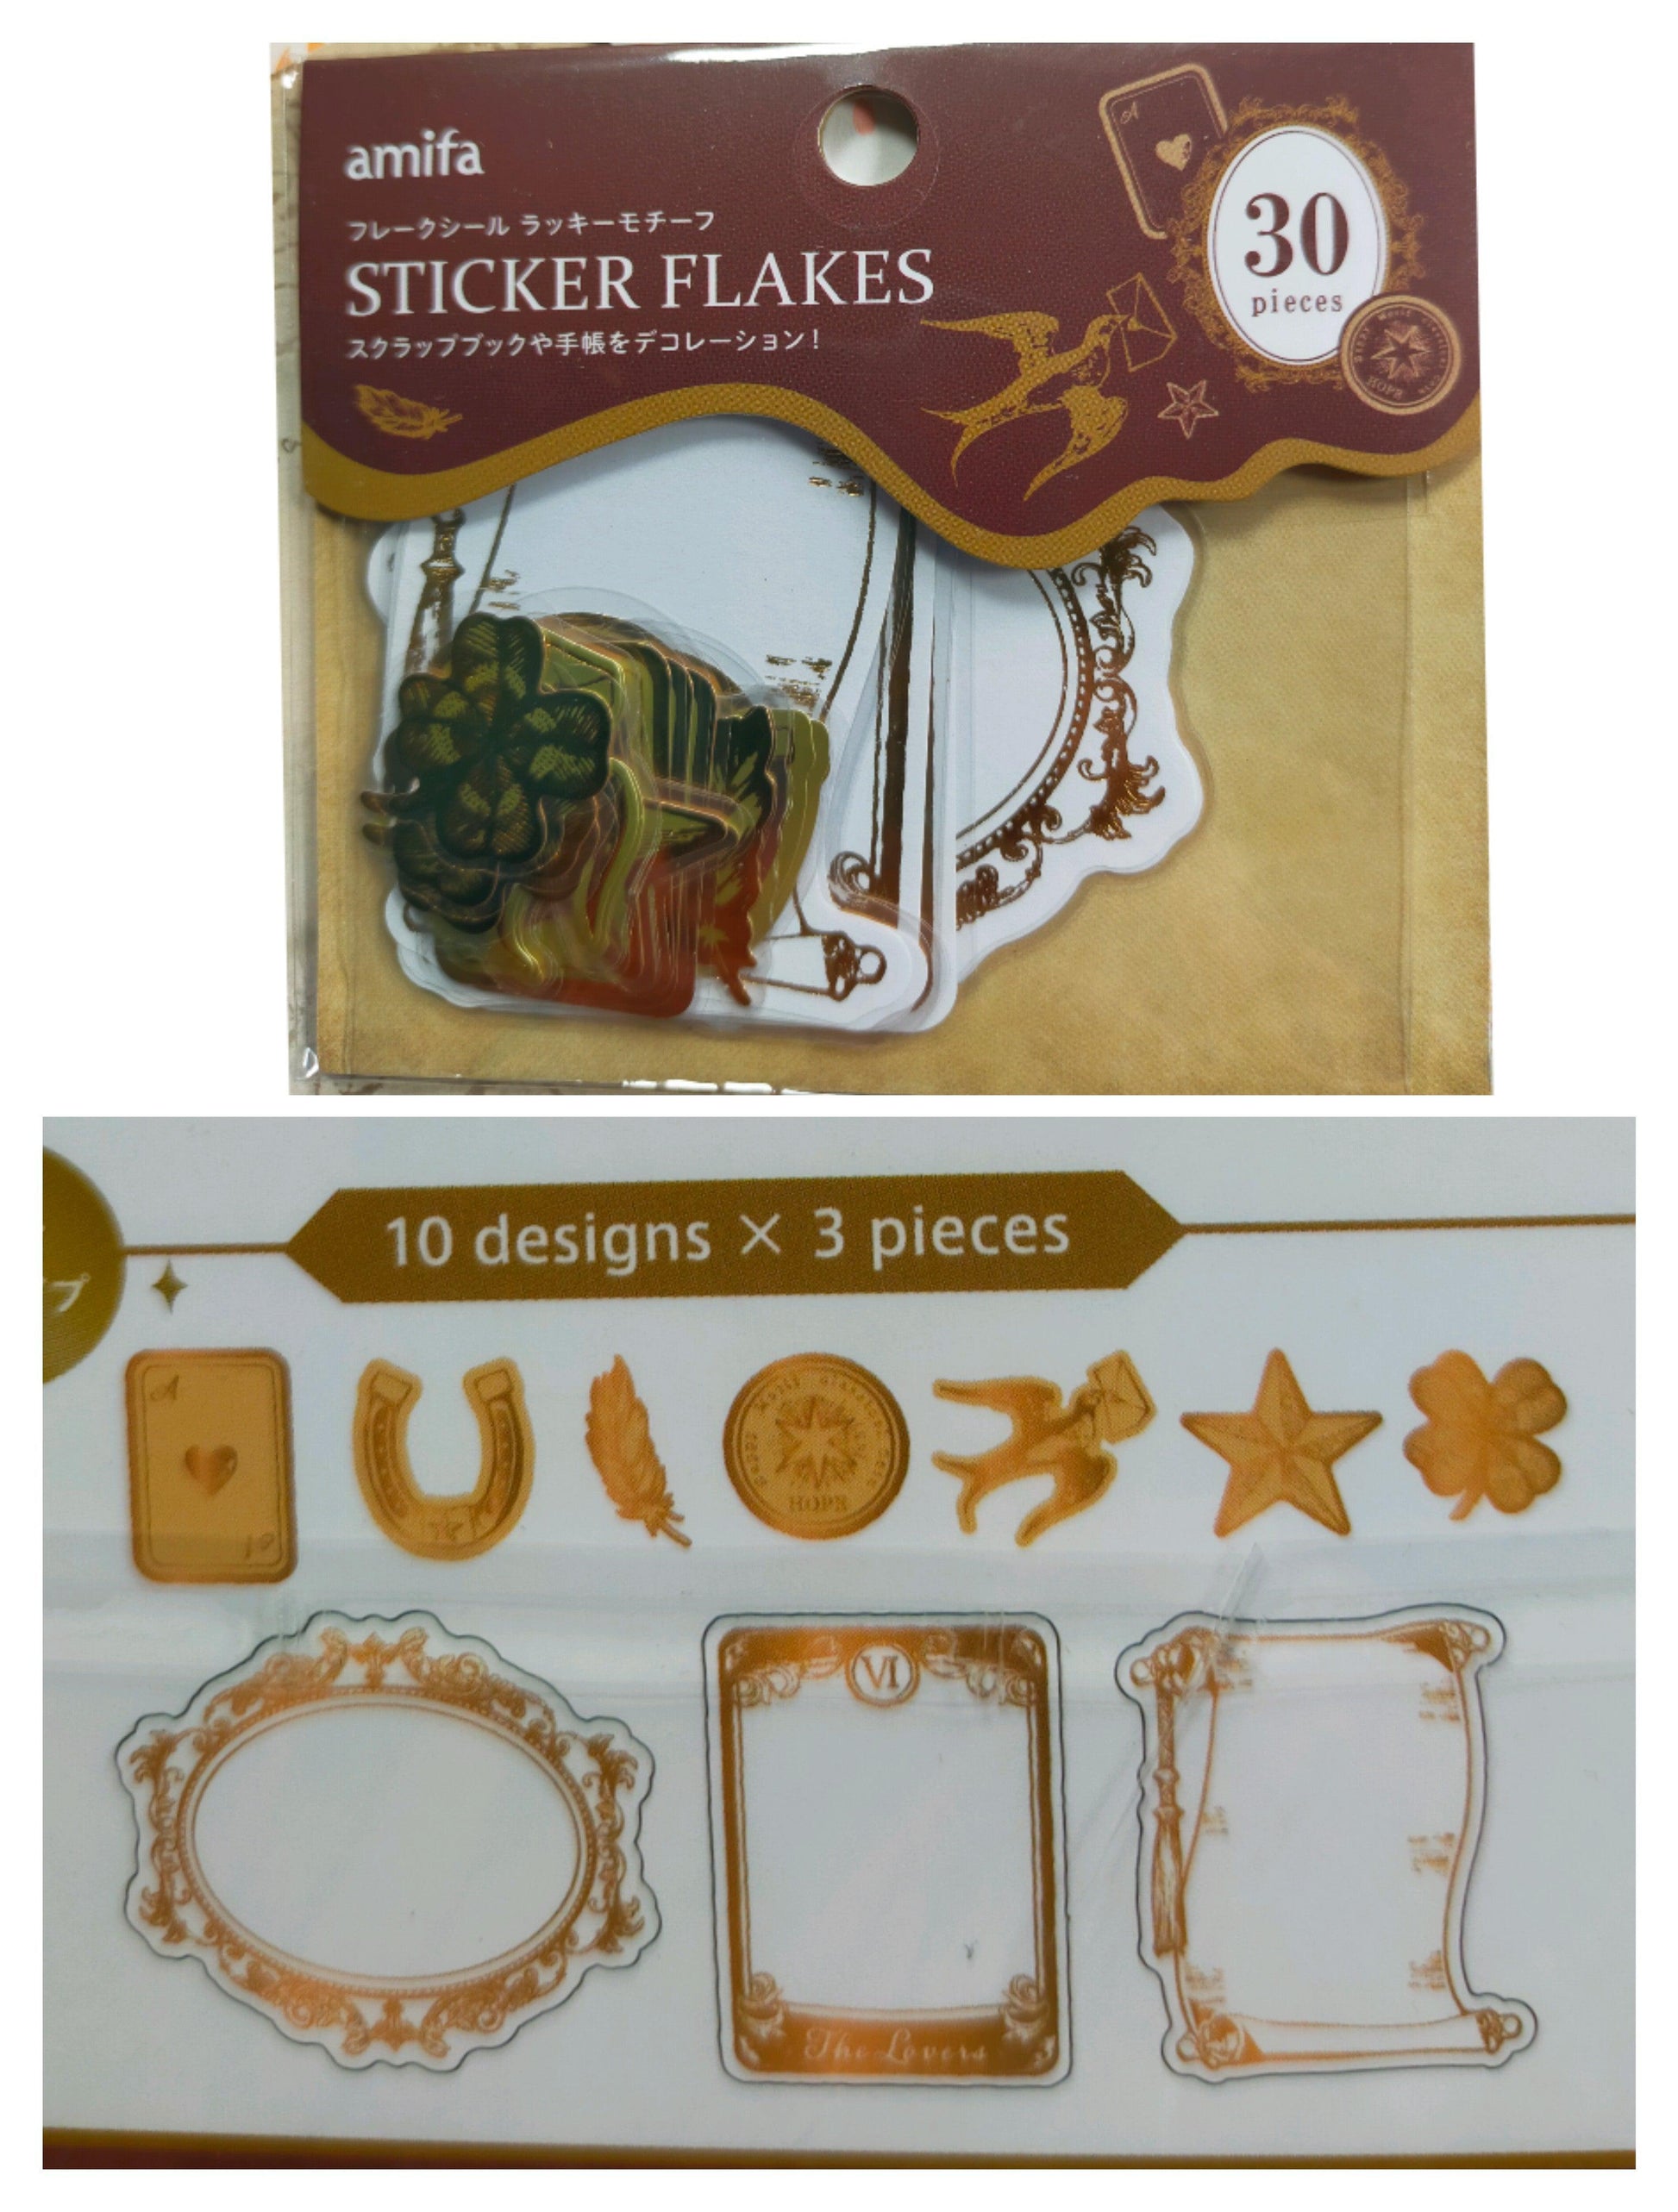 STICKER FLAKES Lucky motif foil stamping 10designs*3pieces, amifa_ Gold / Silver